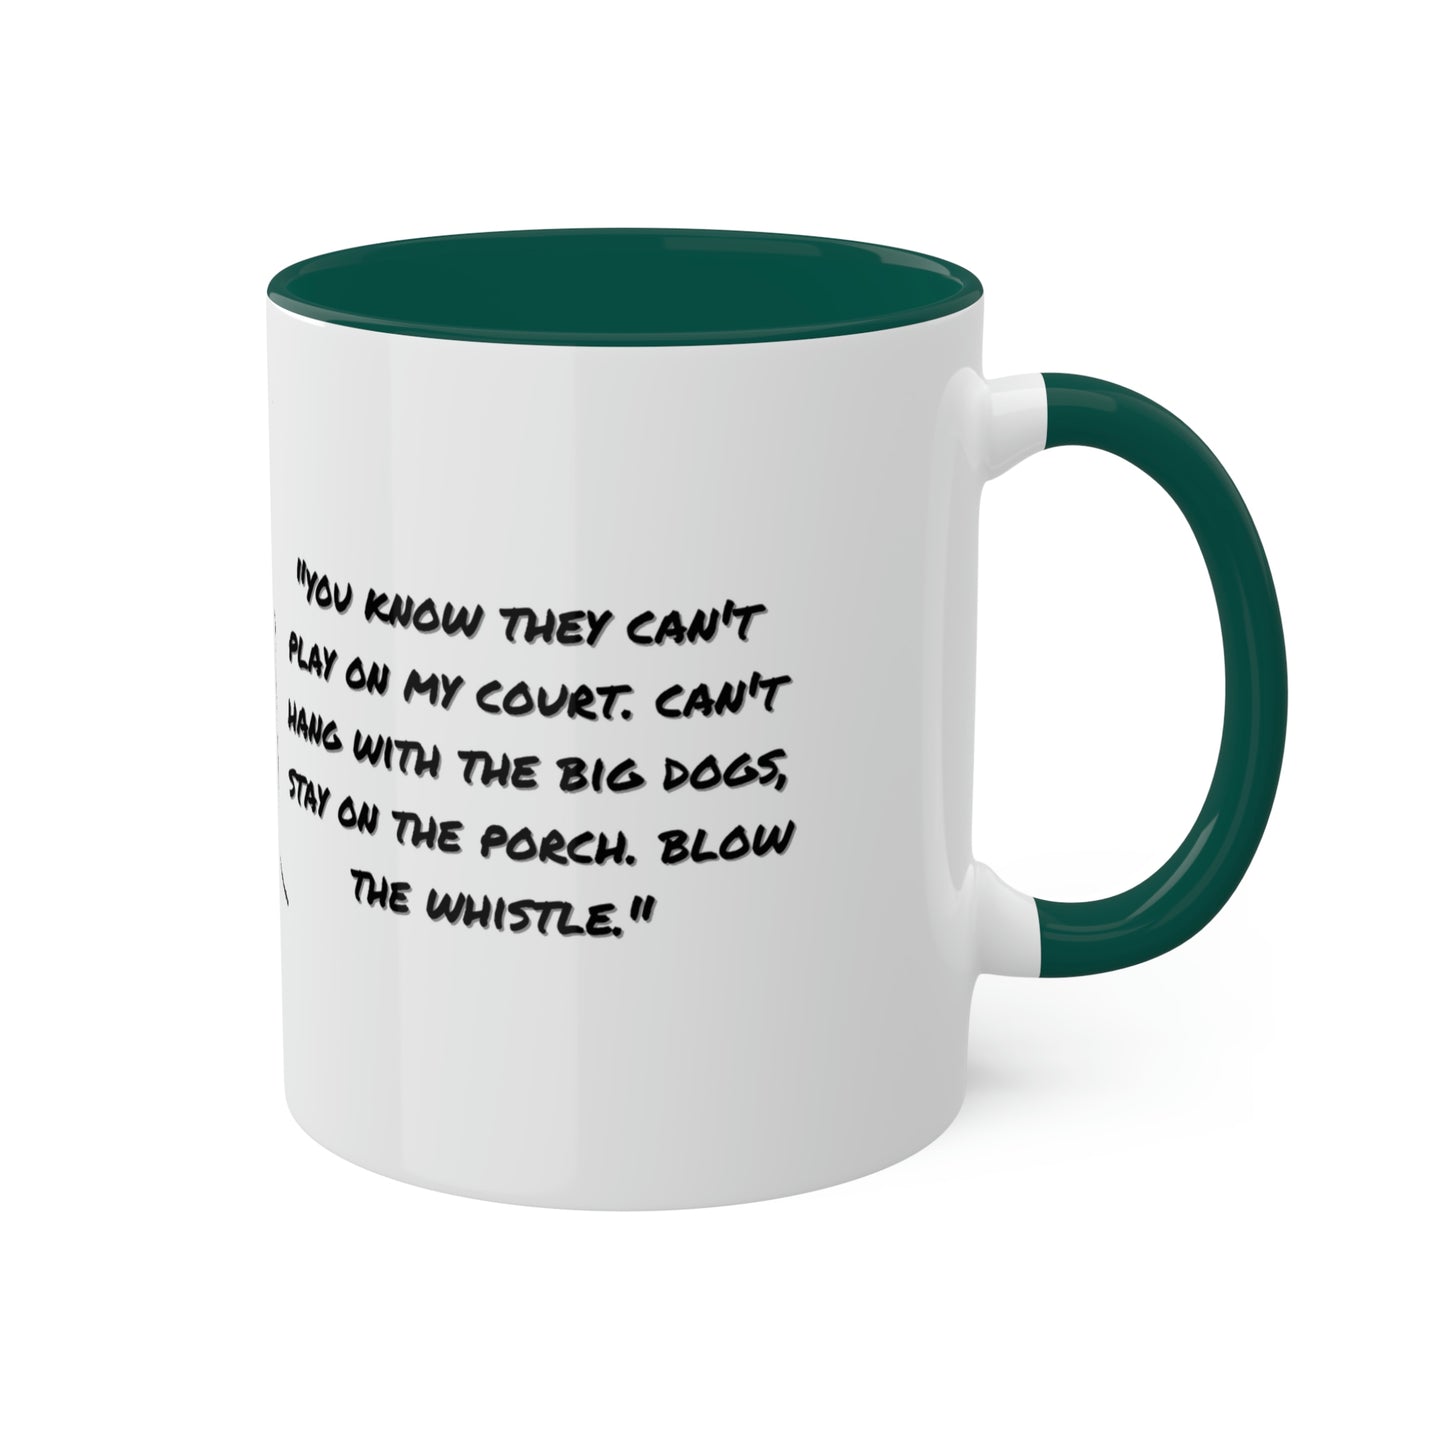 Too $hort #BlowtheWhistle - Colorful Mugs, 11oz